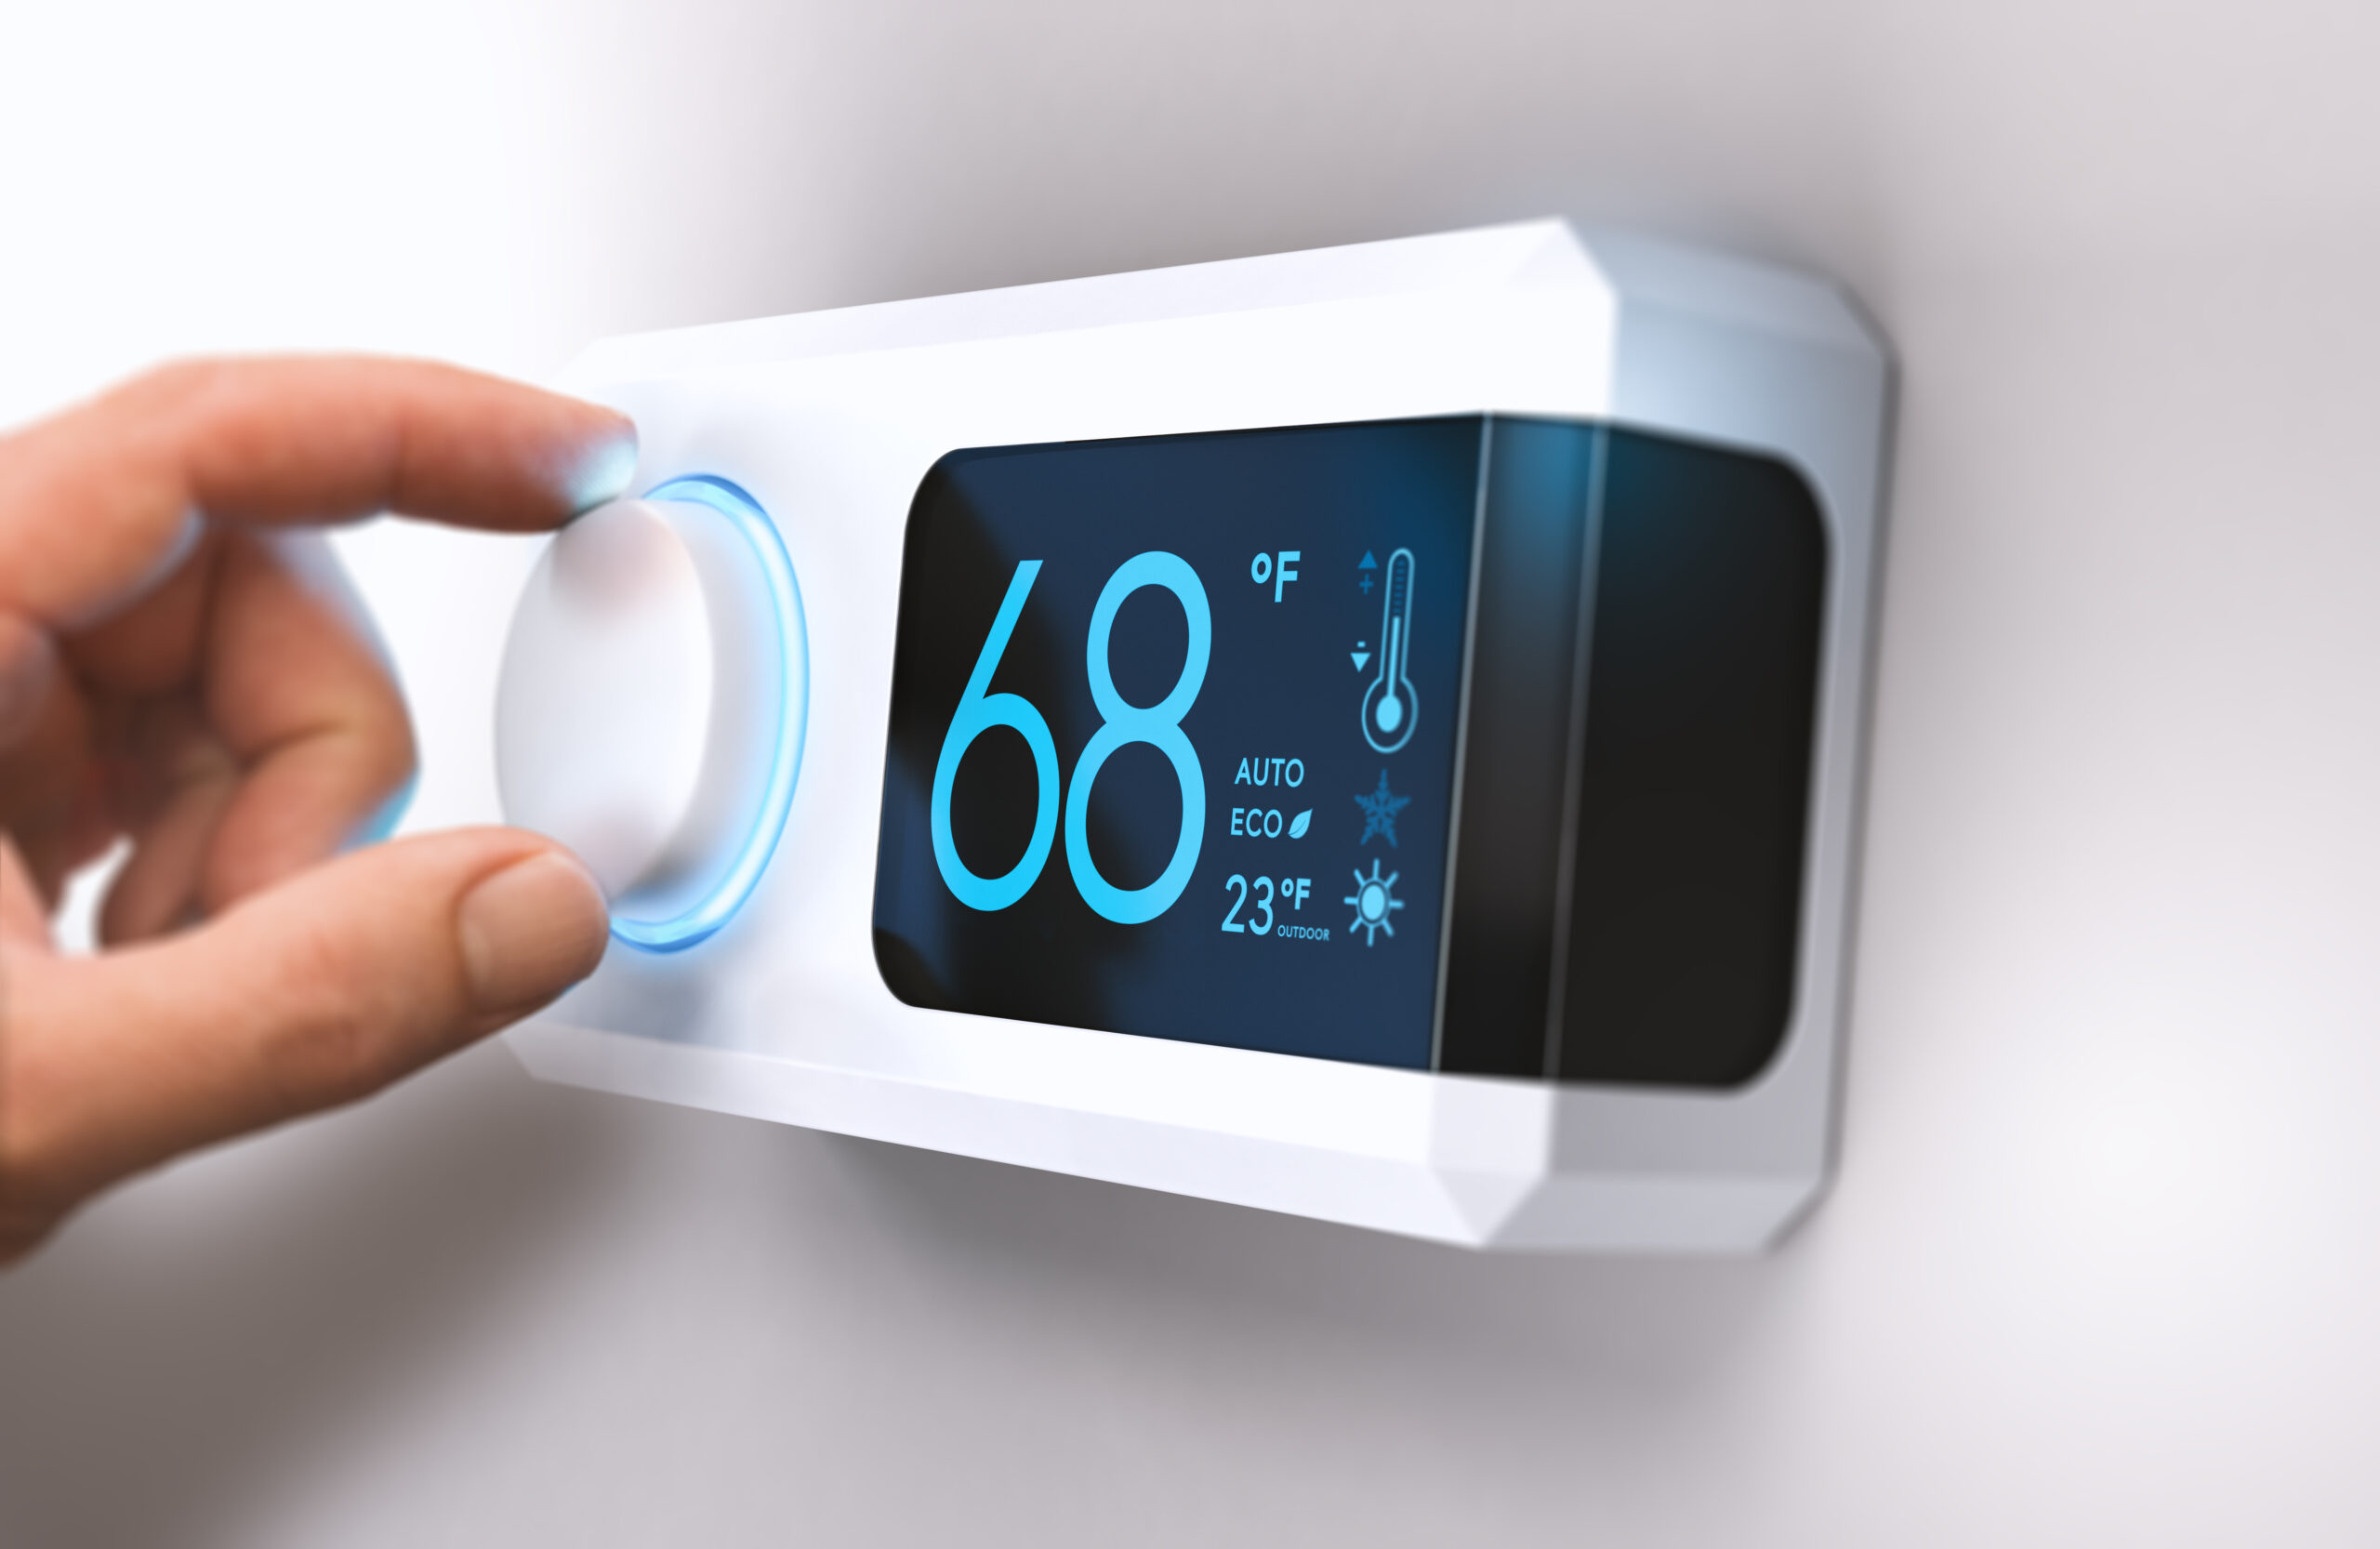 hand turning down temperature for home energy savings